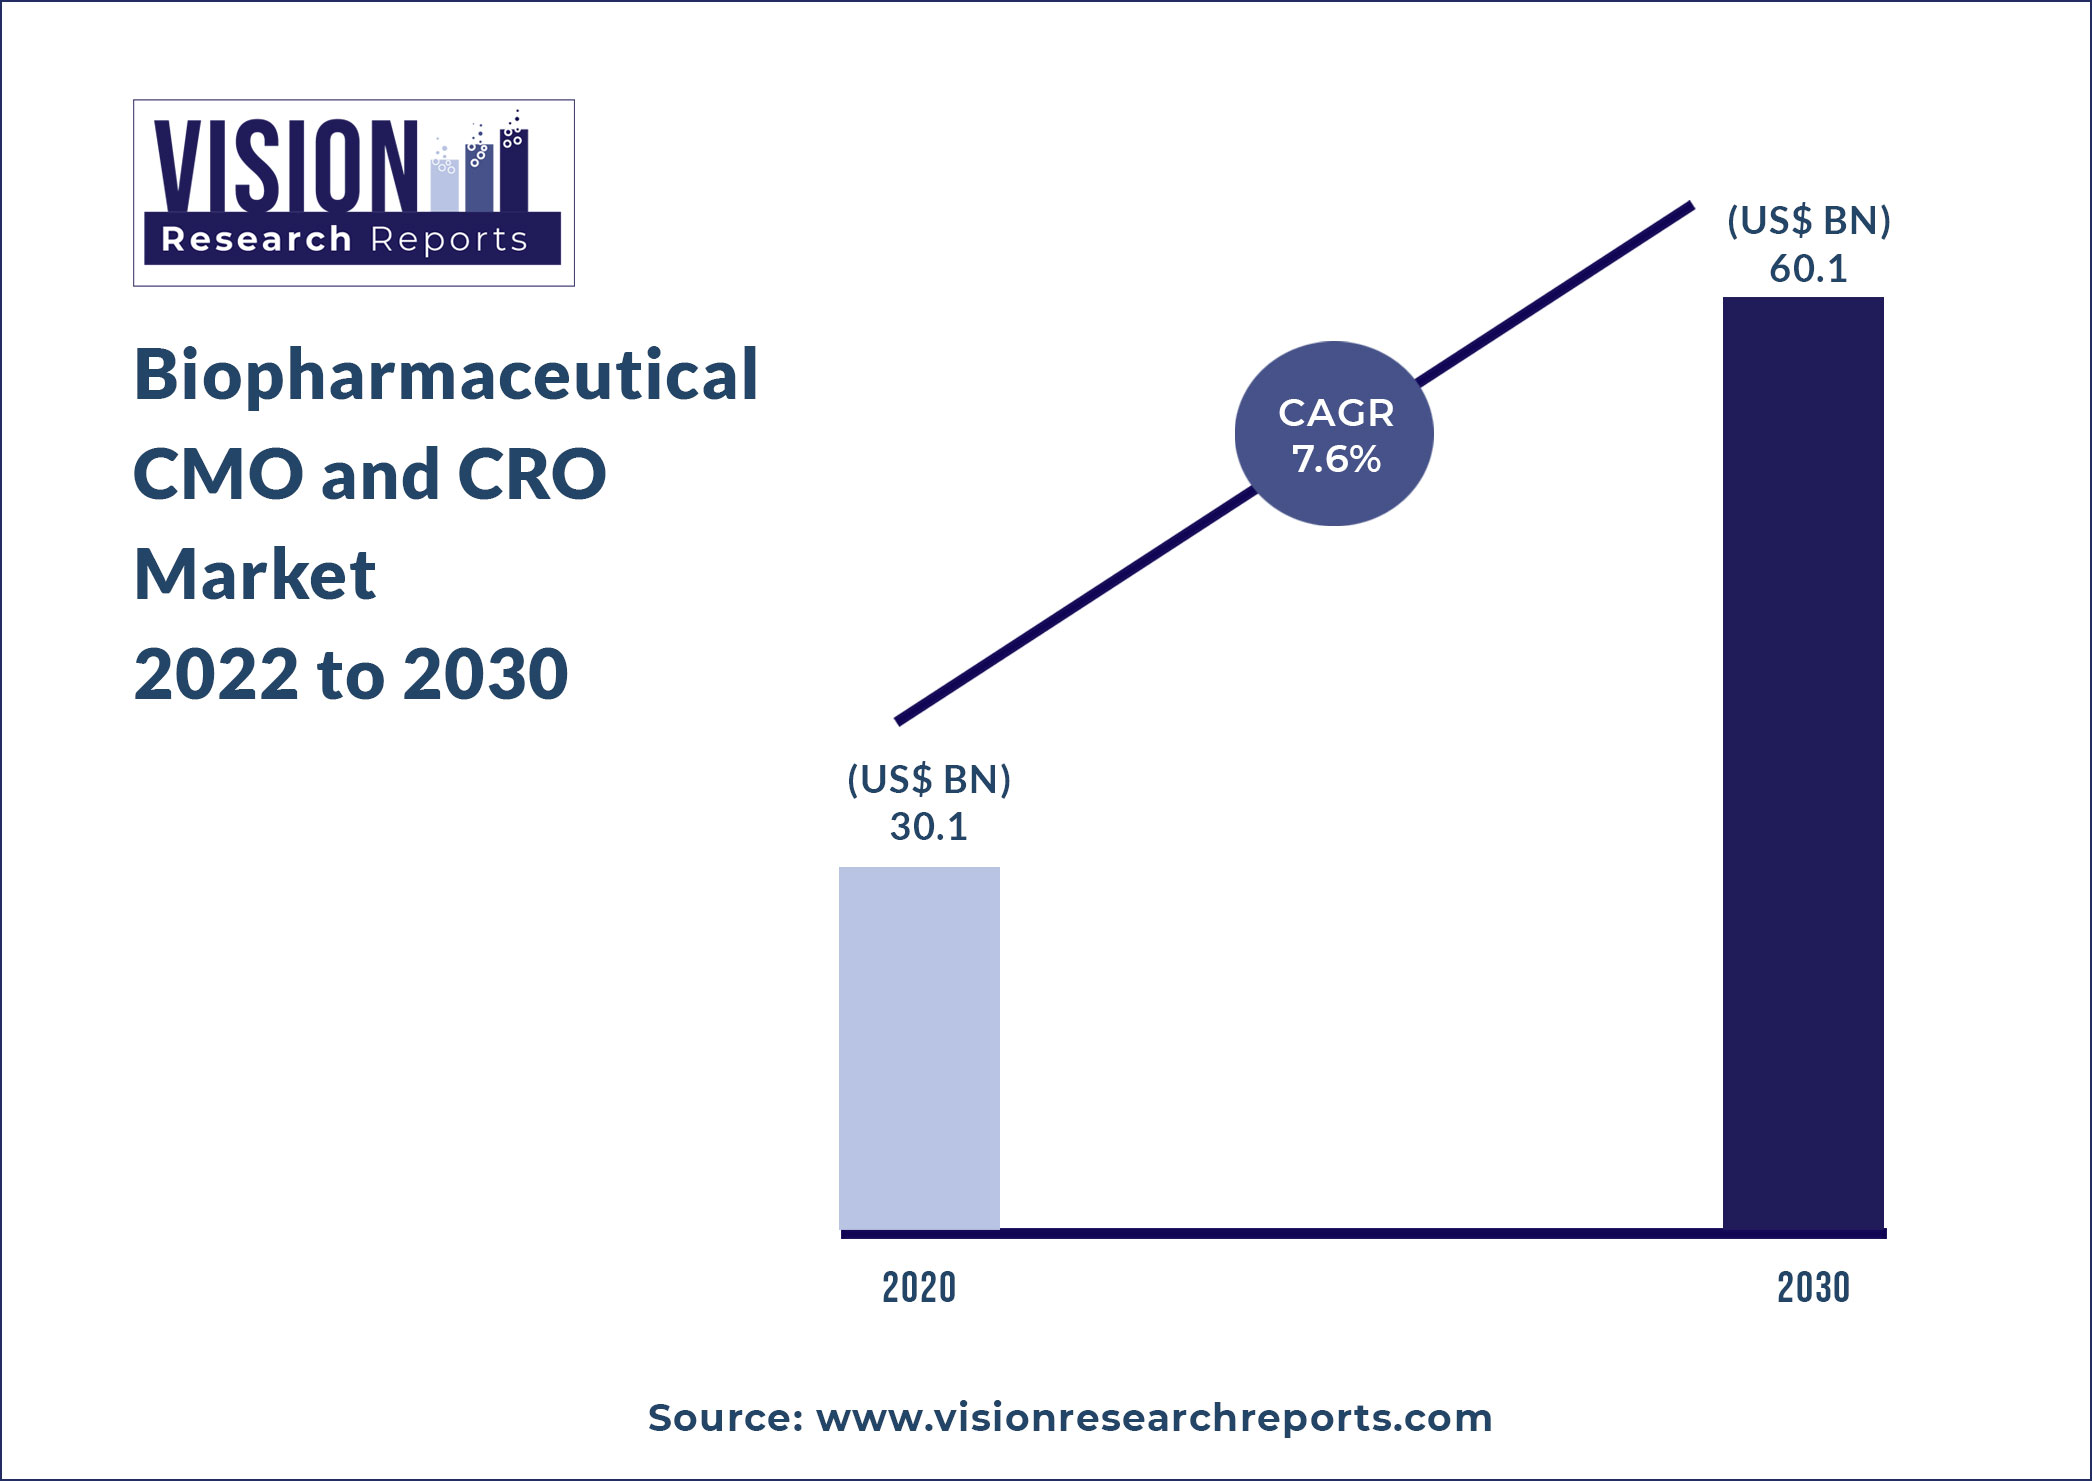 Biopharmaceutical CMO and CRO Market Size 2022 to 2030